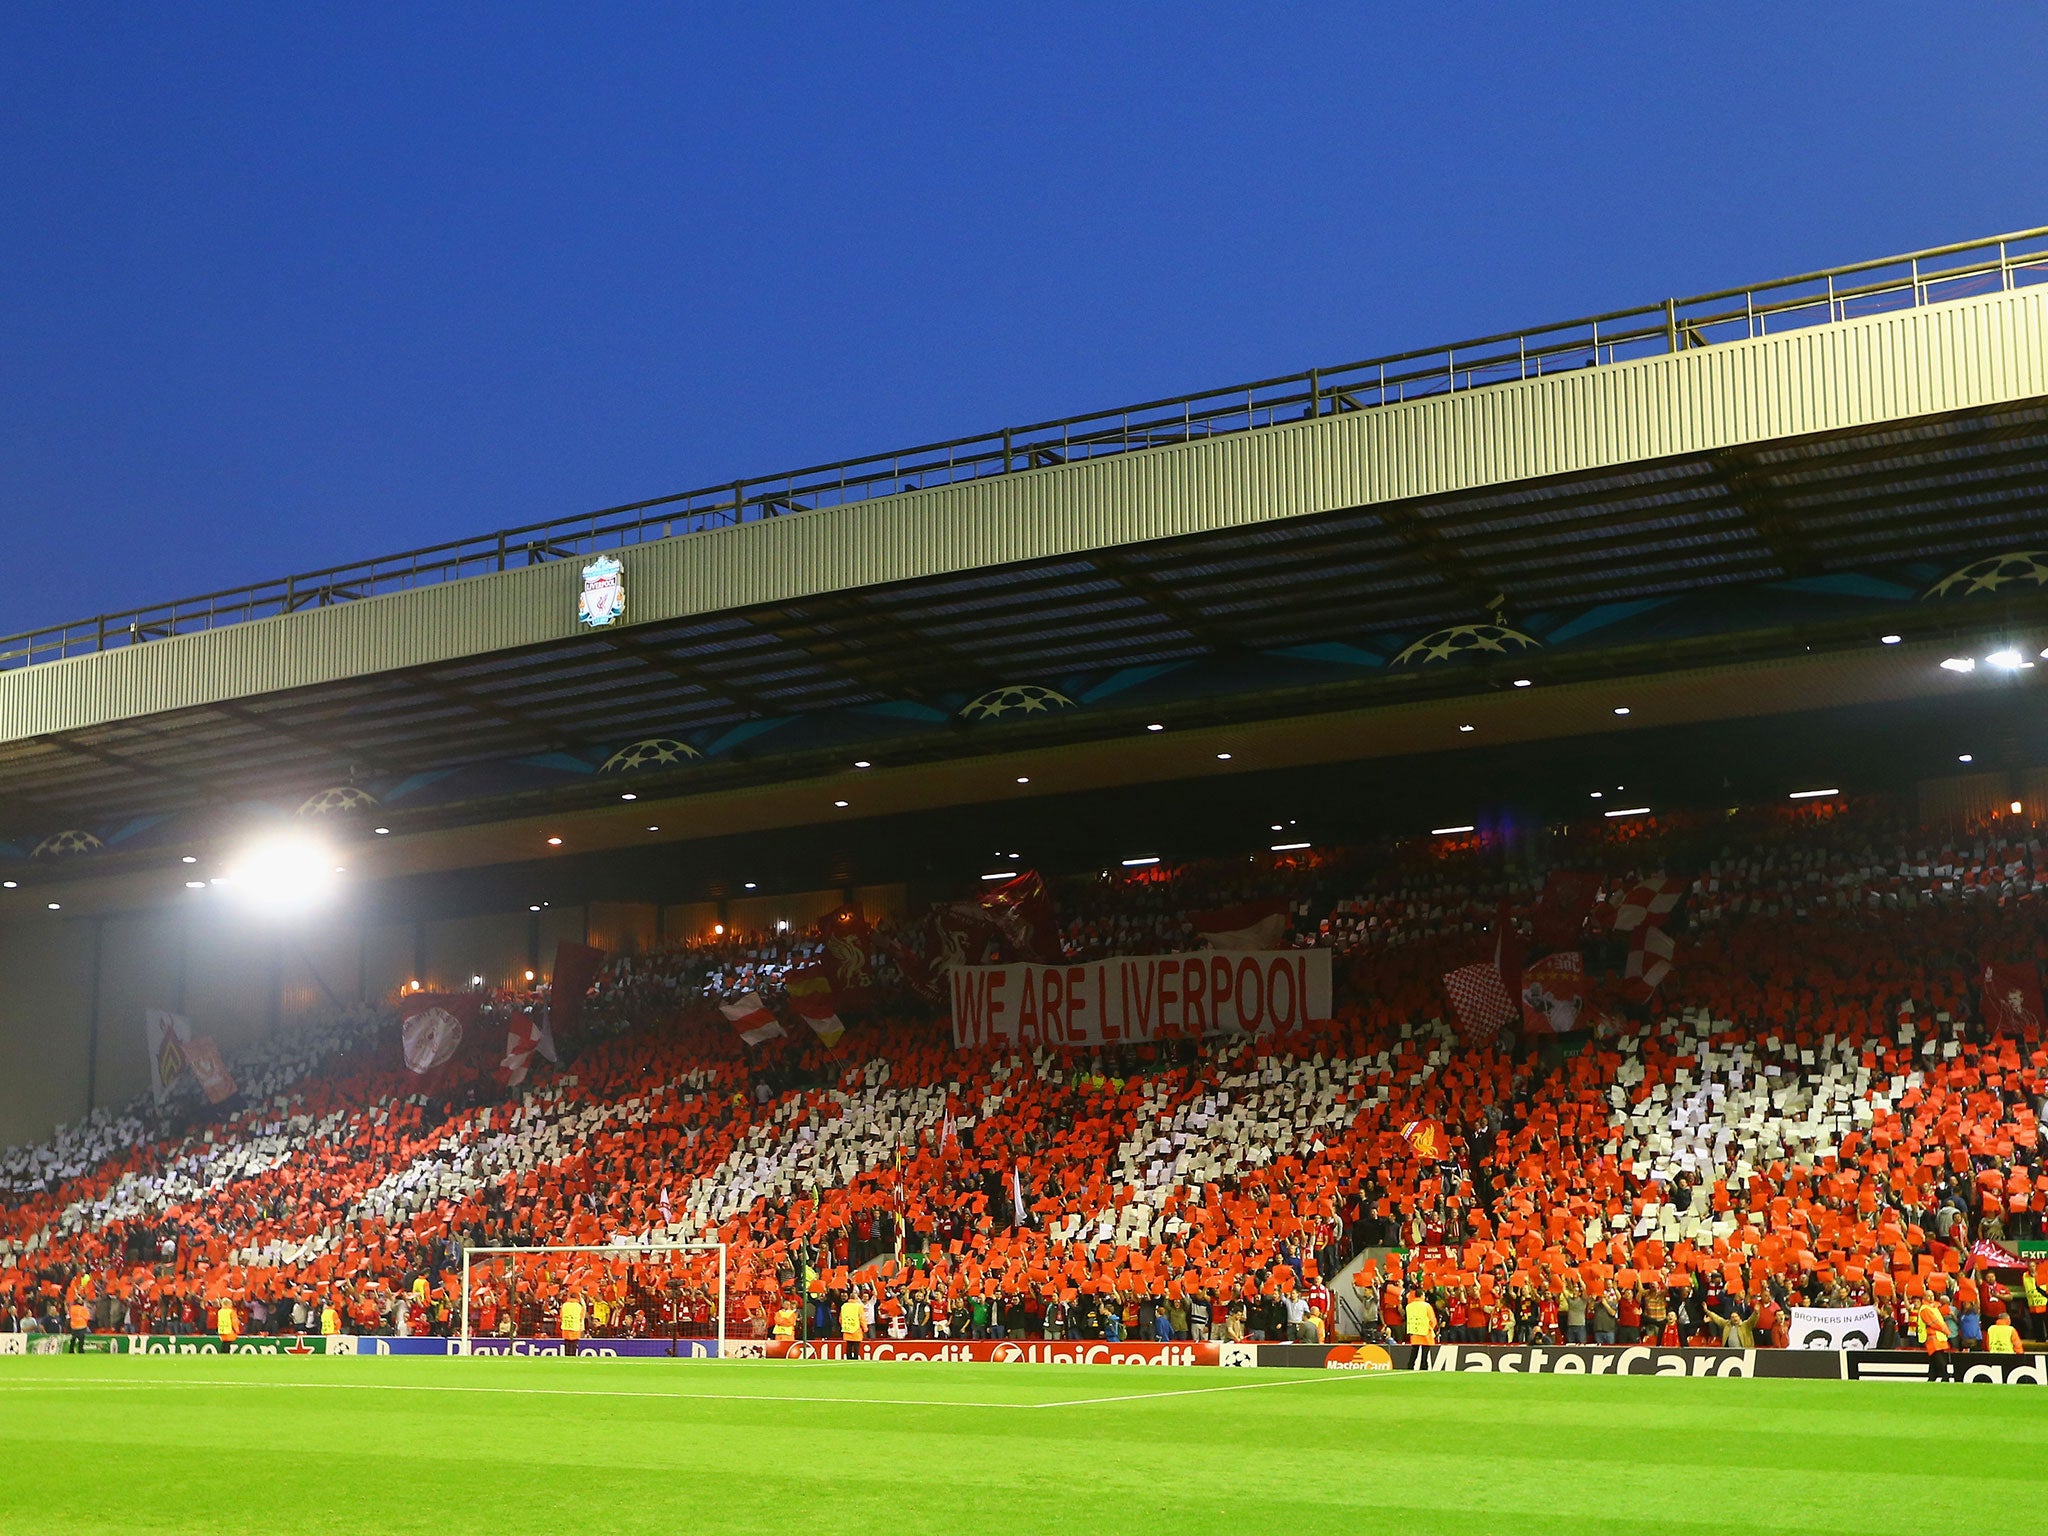 Anfield before kick-off